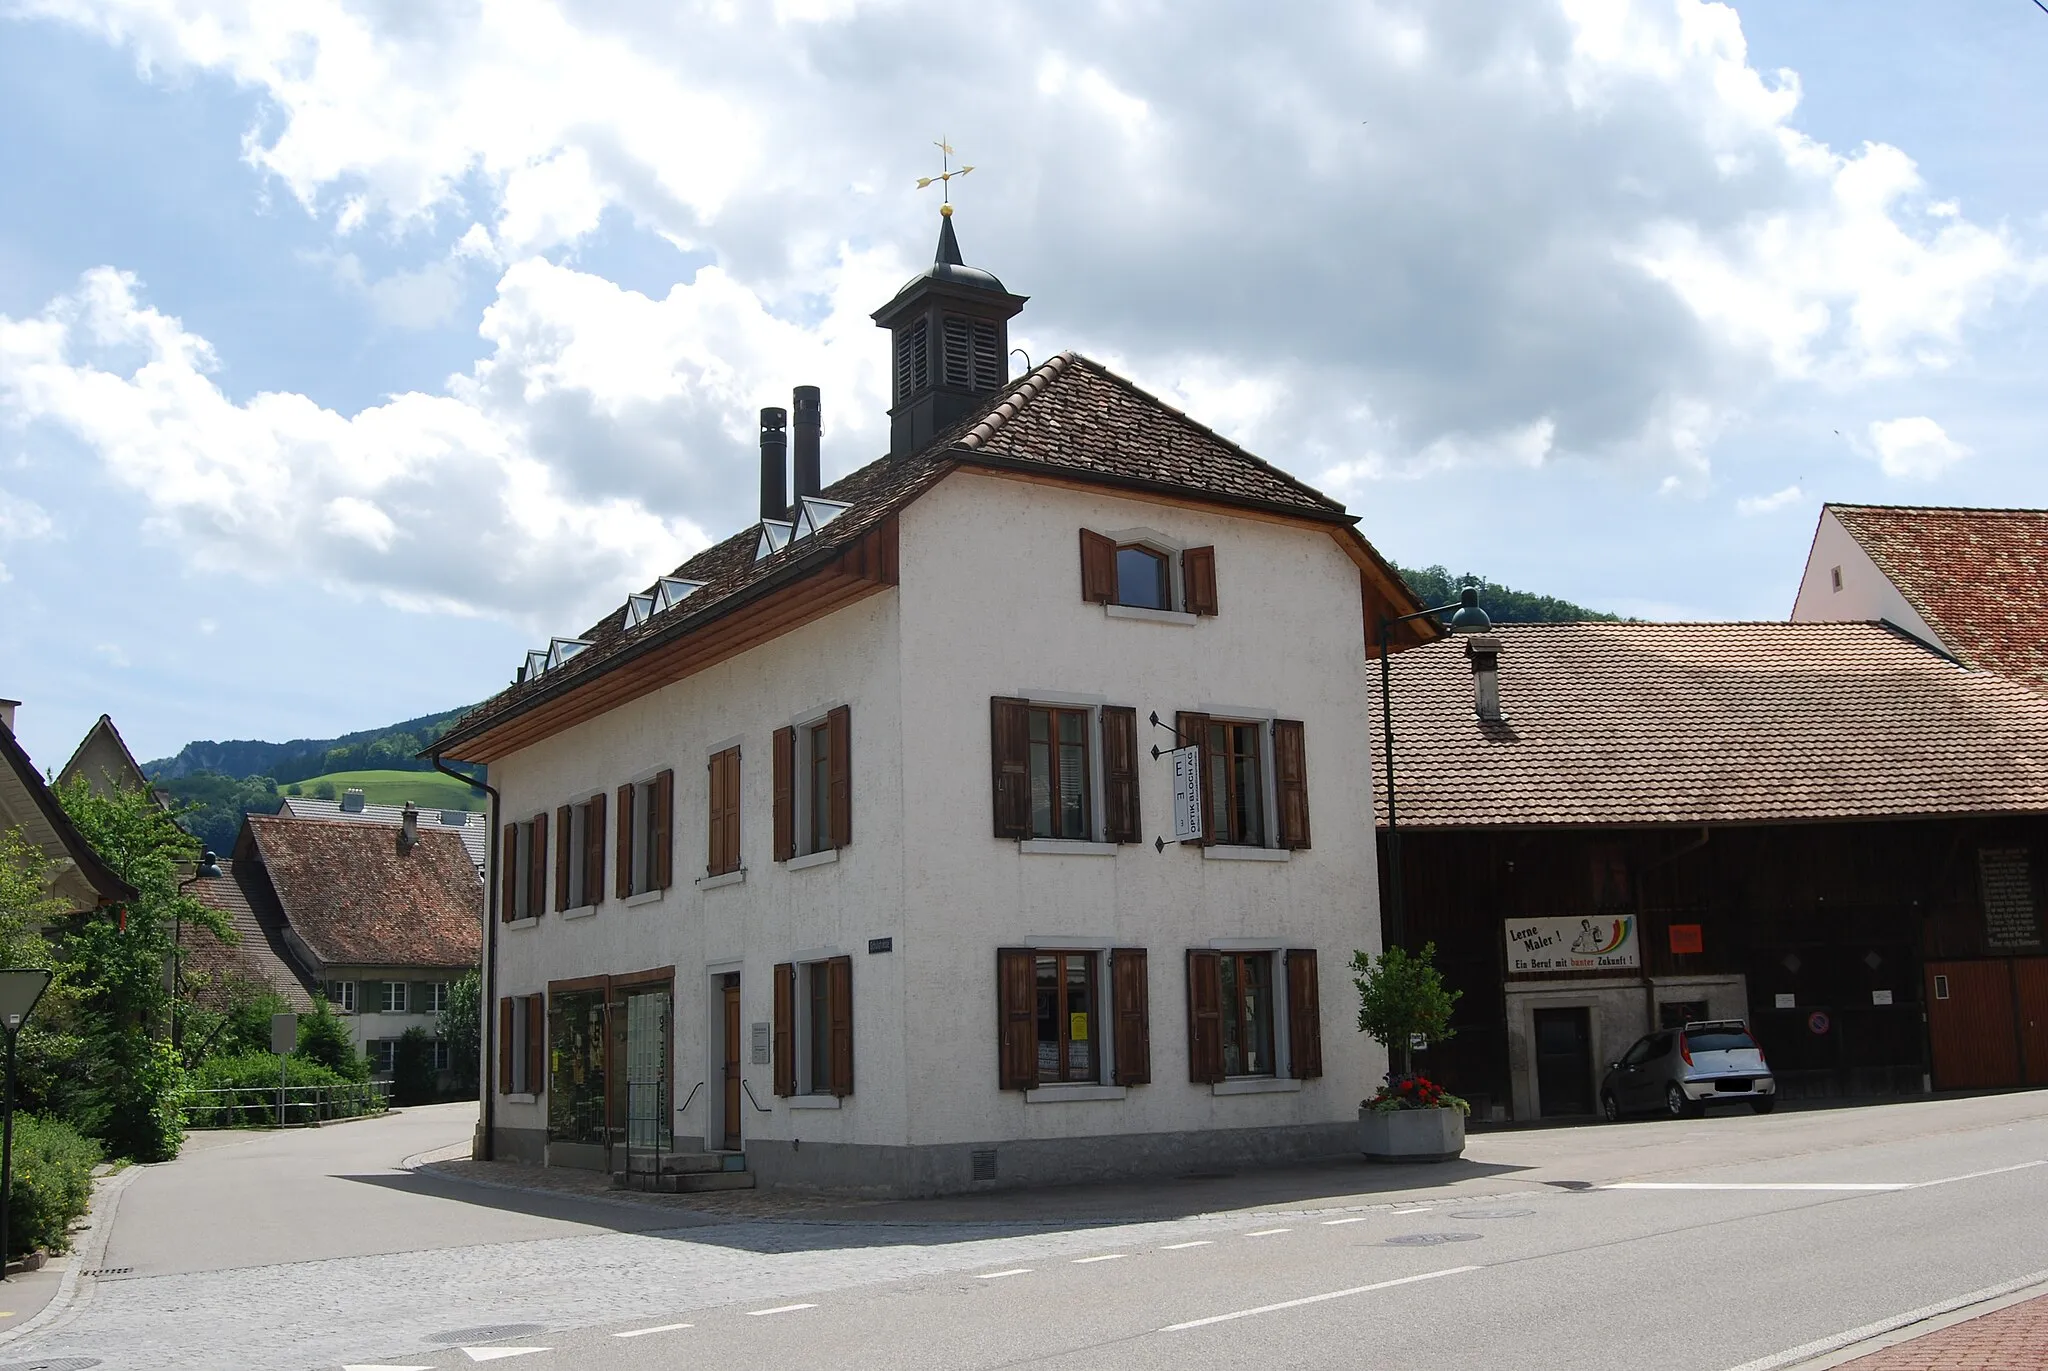 Photo showing: Oberdorf, canton of Basel-Country, Switzerland